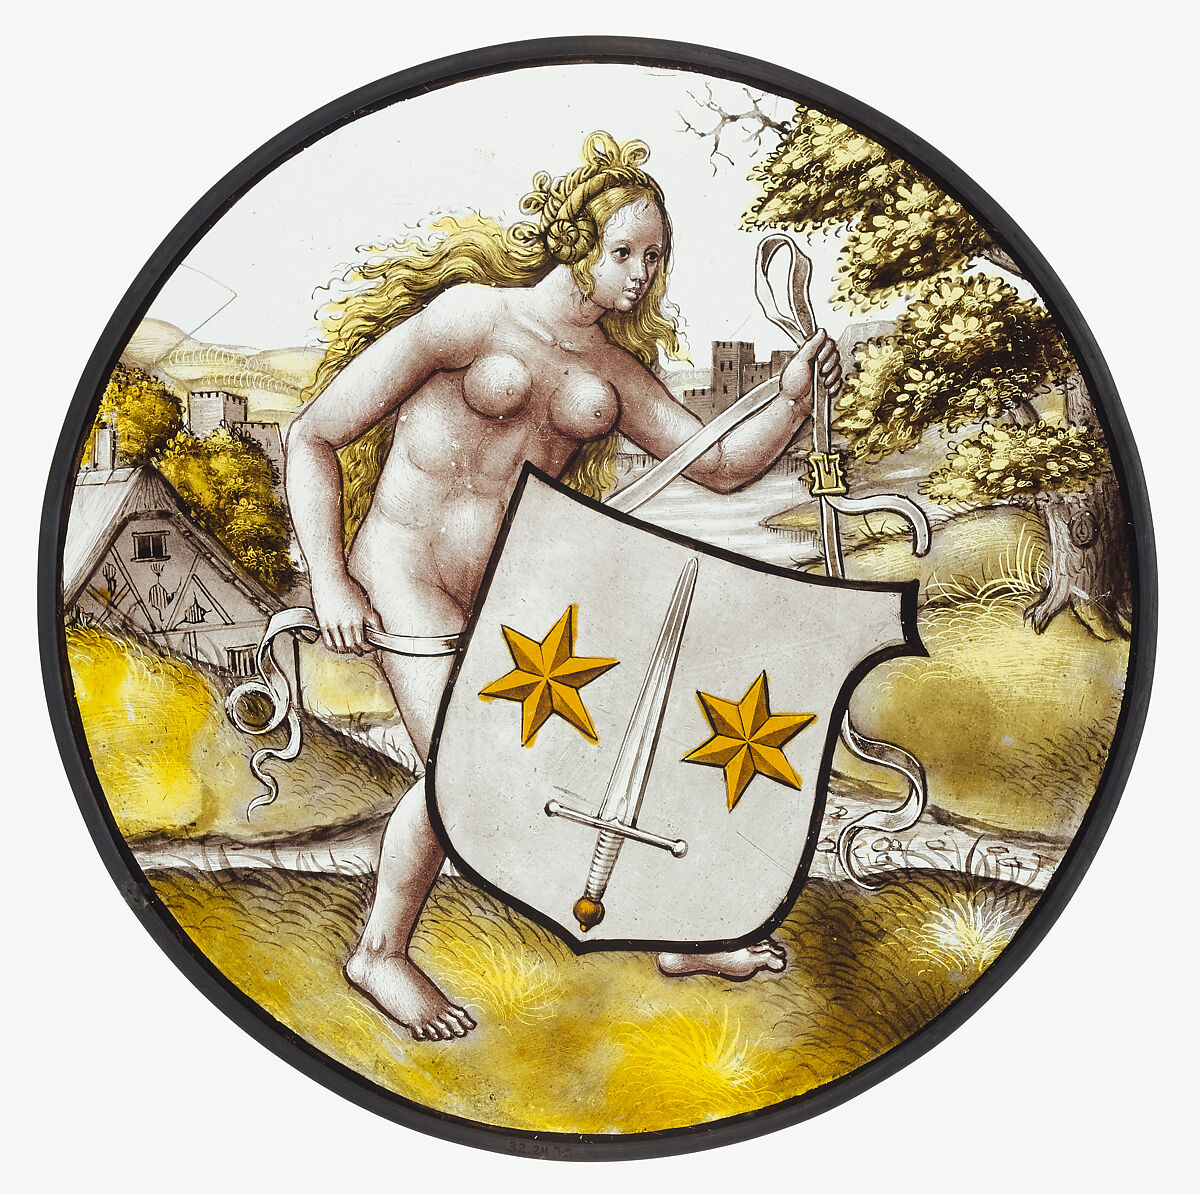 Roundel with Nude Woman Supporting a Heraldic Shield, Style of Jan Gossart (called Mabuse) (Netherlandish, Maubeuge ca. 1478–1532 Antwerp (?)), Colorless glass, vitreous paint and silver stain, South Netherlandish 